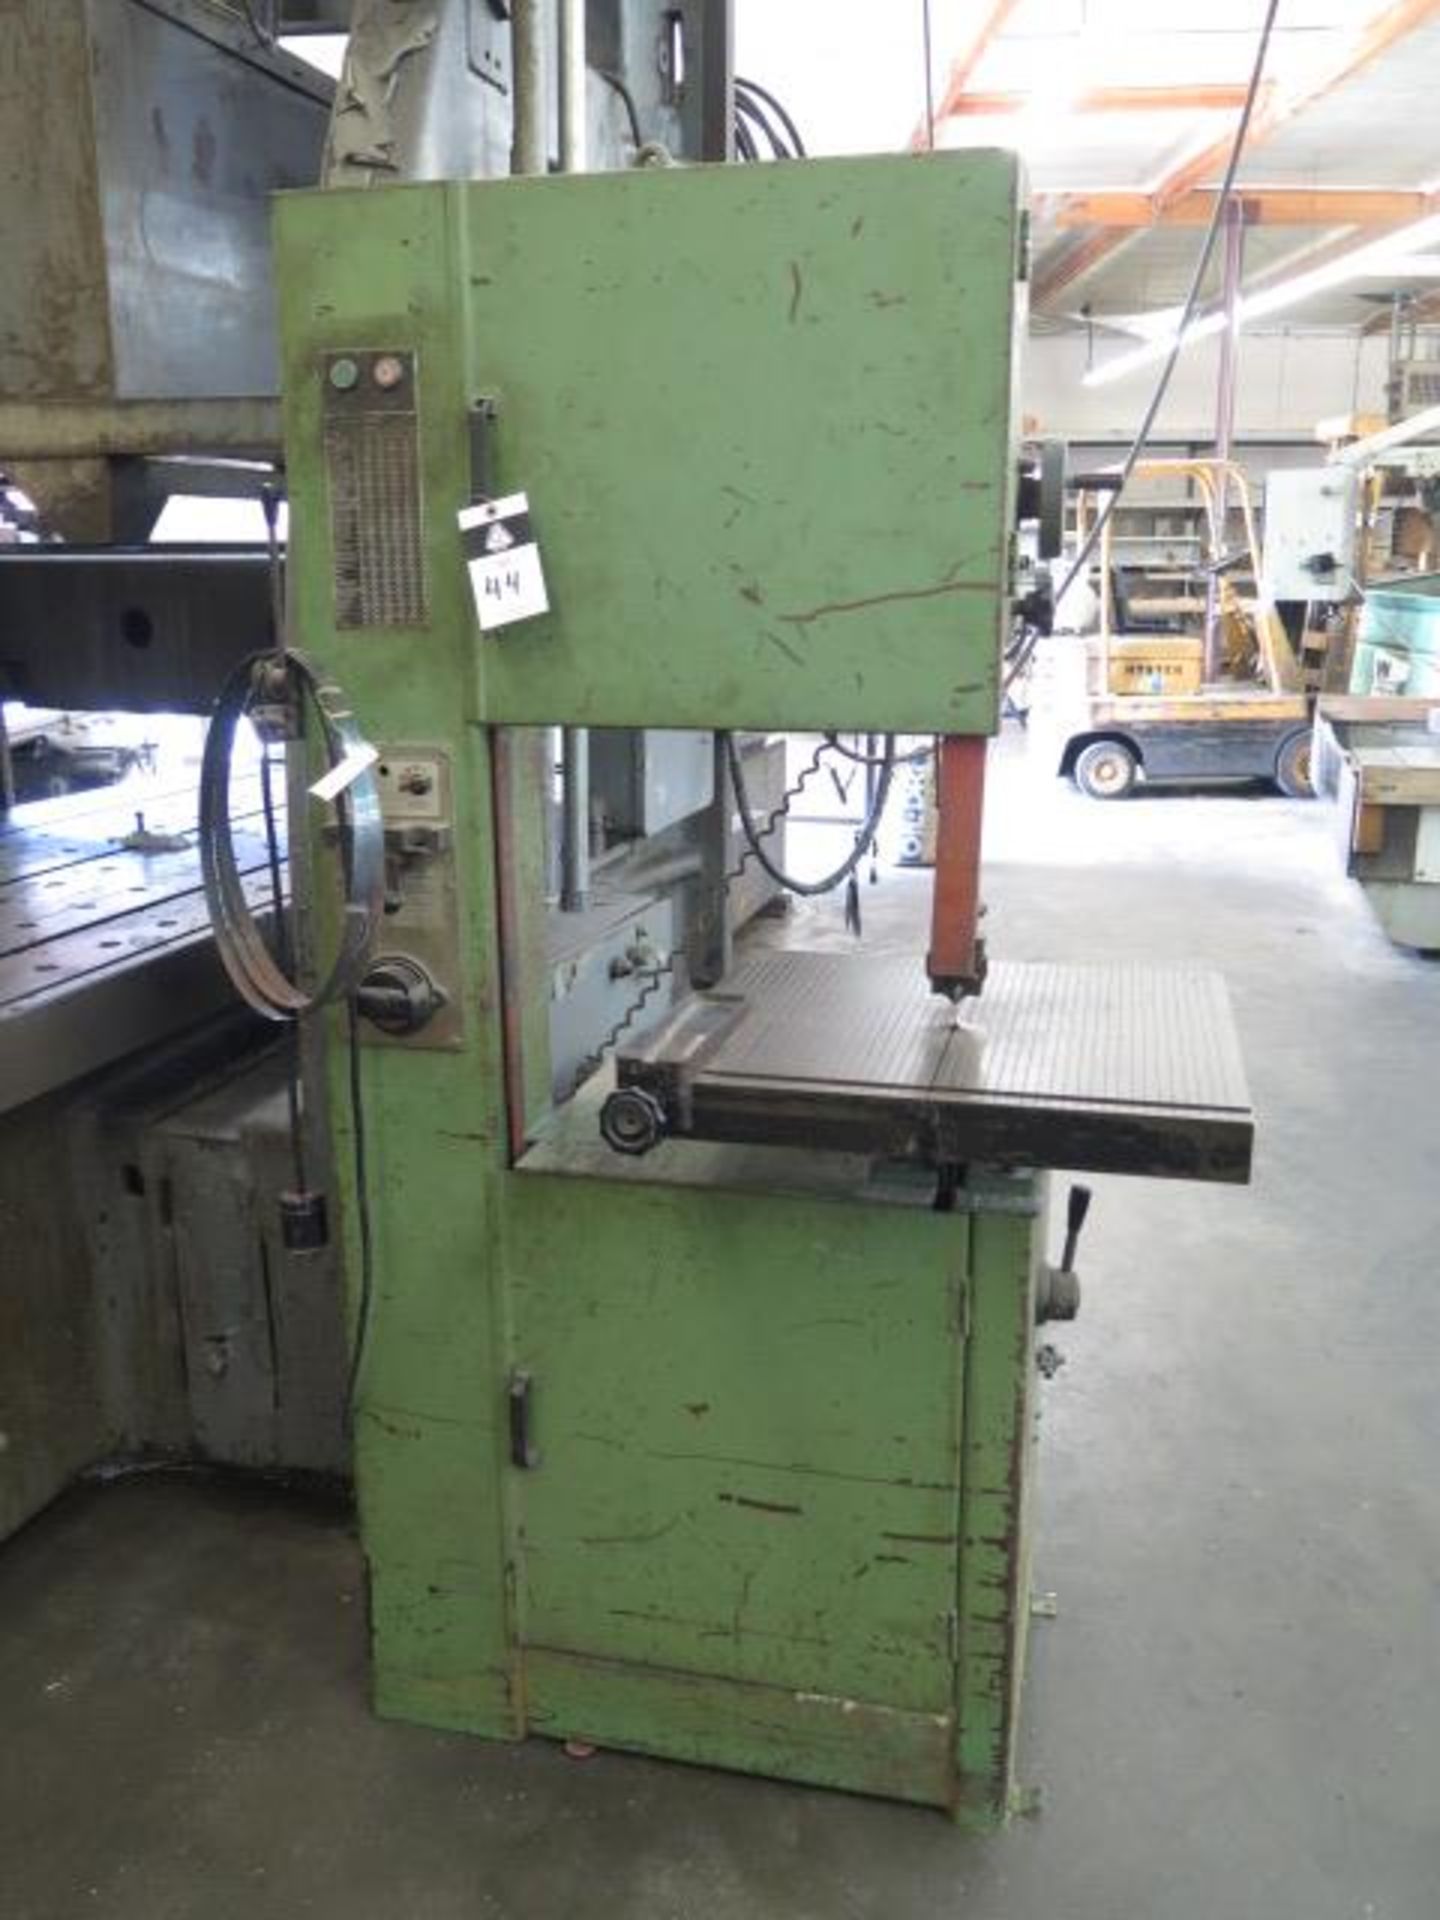 Import 20” Vertical Band Saw w/ Blade Welder, 22” x 23 ½” Table (SOLD AS-IS - NO WARRANTY)